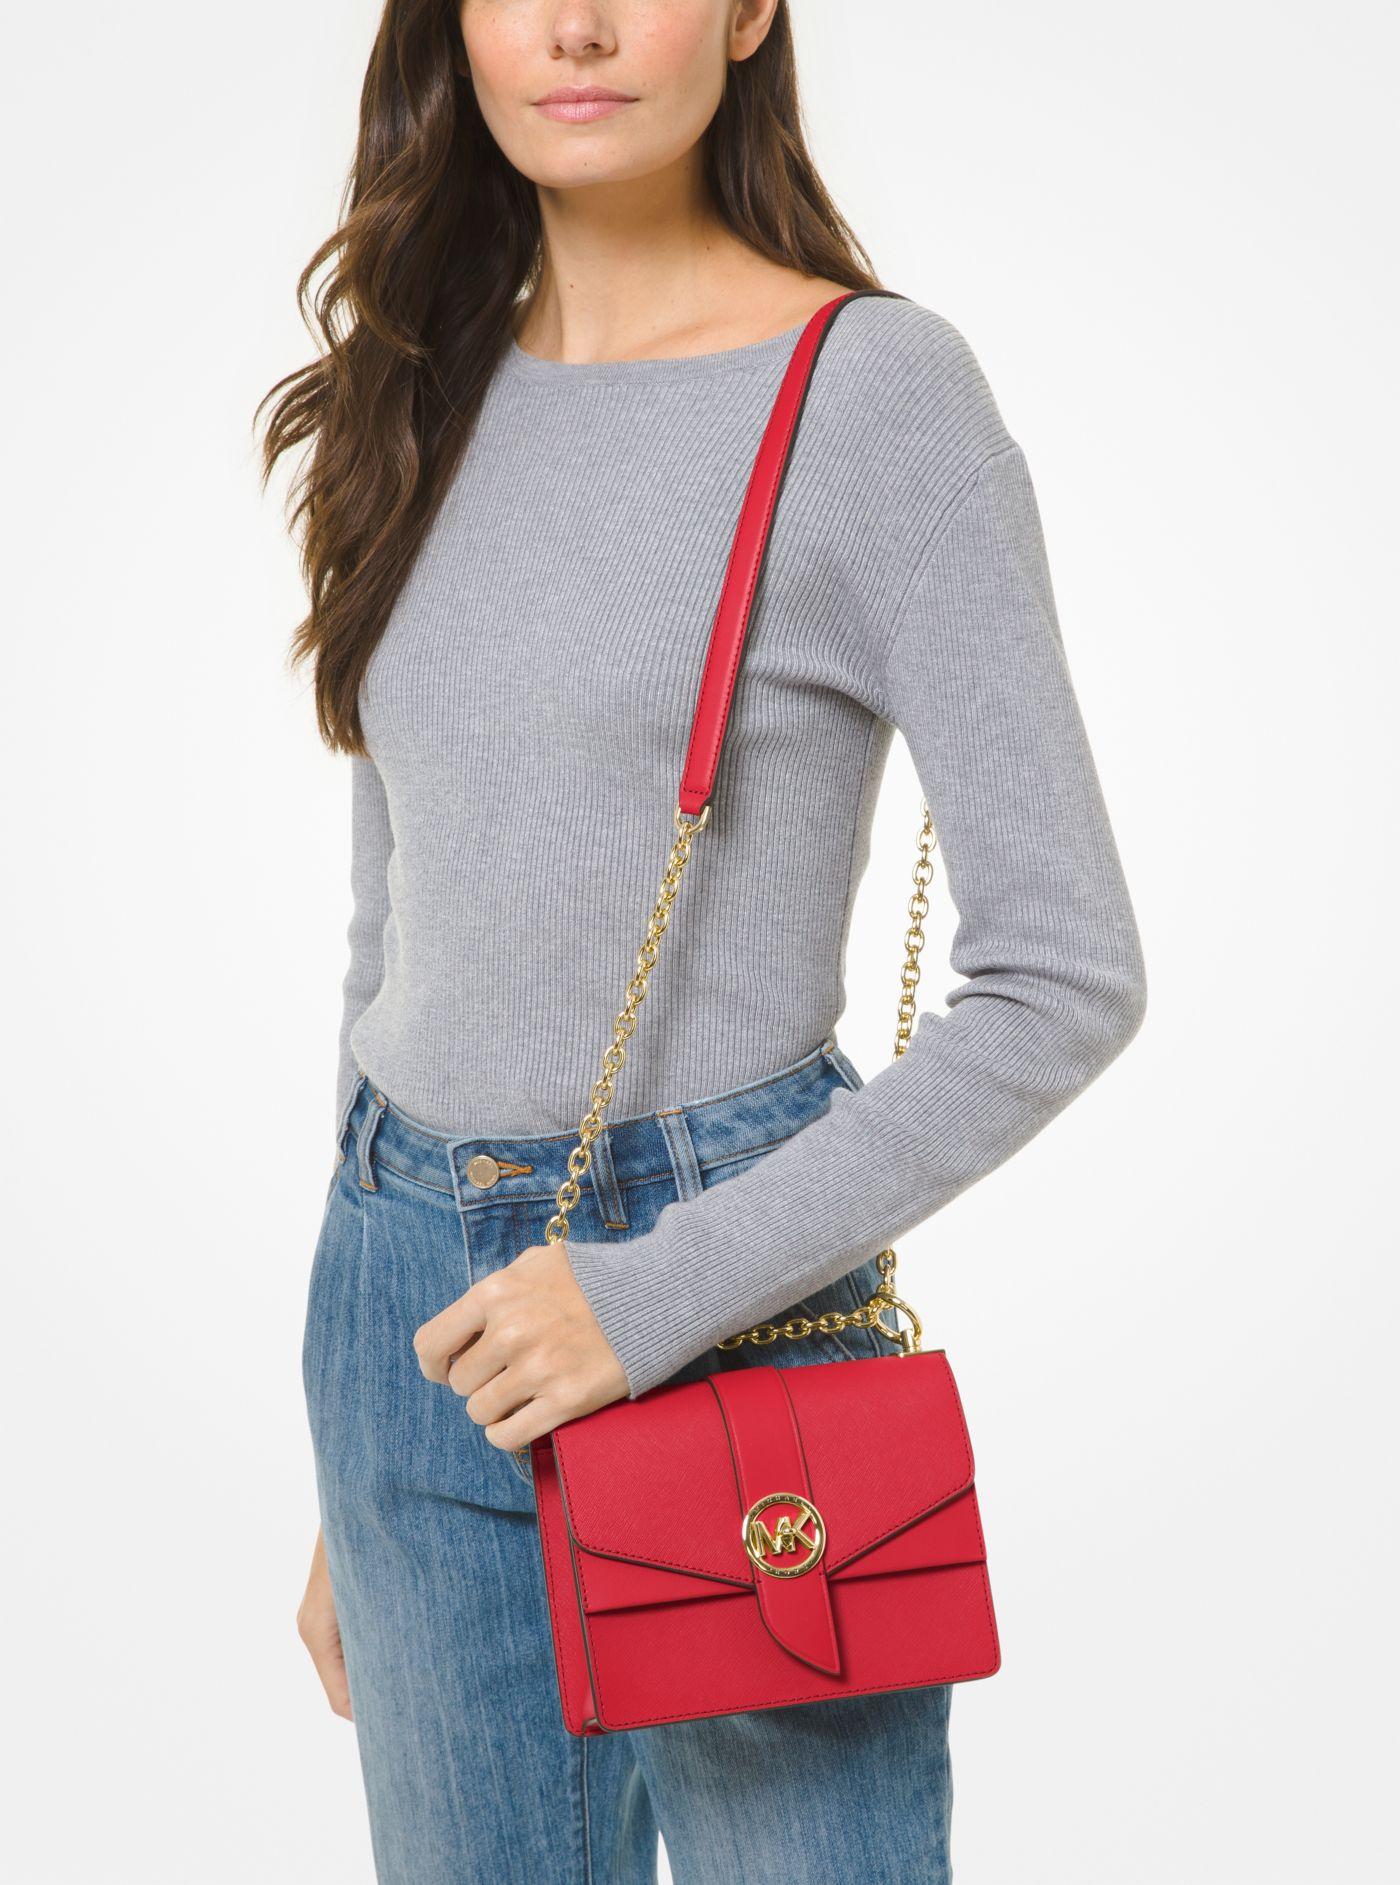 Michael Kors Greenwich Small Saffiano Leather Crossbody Bag in Red